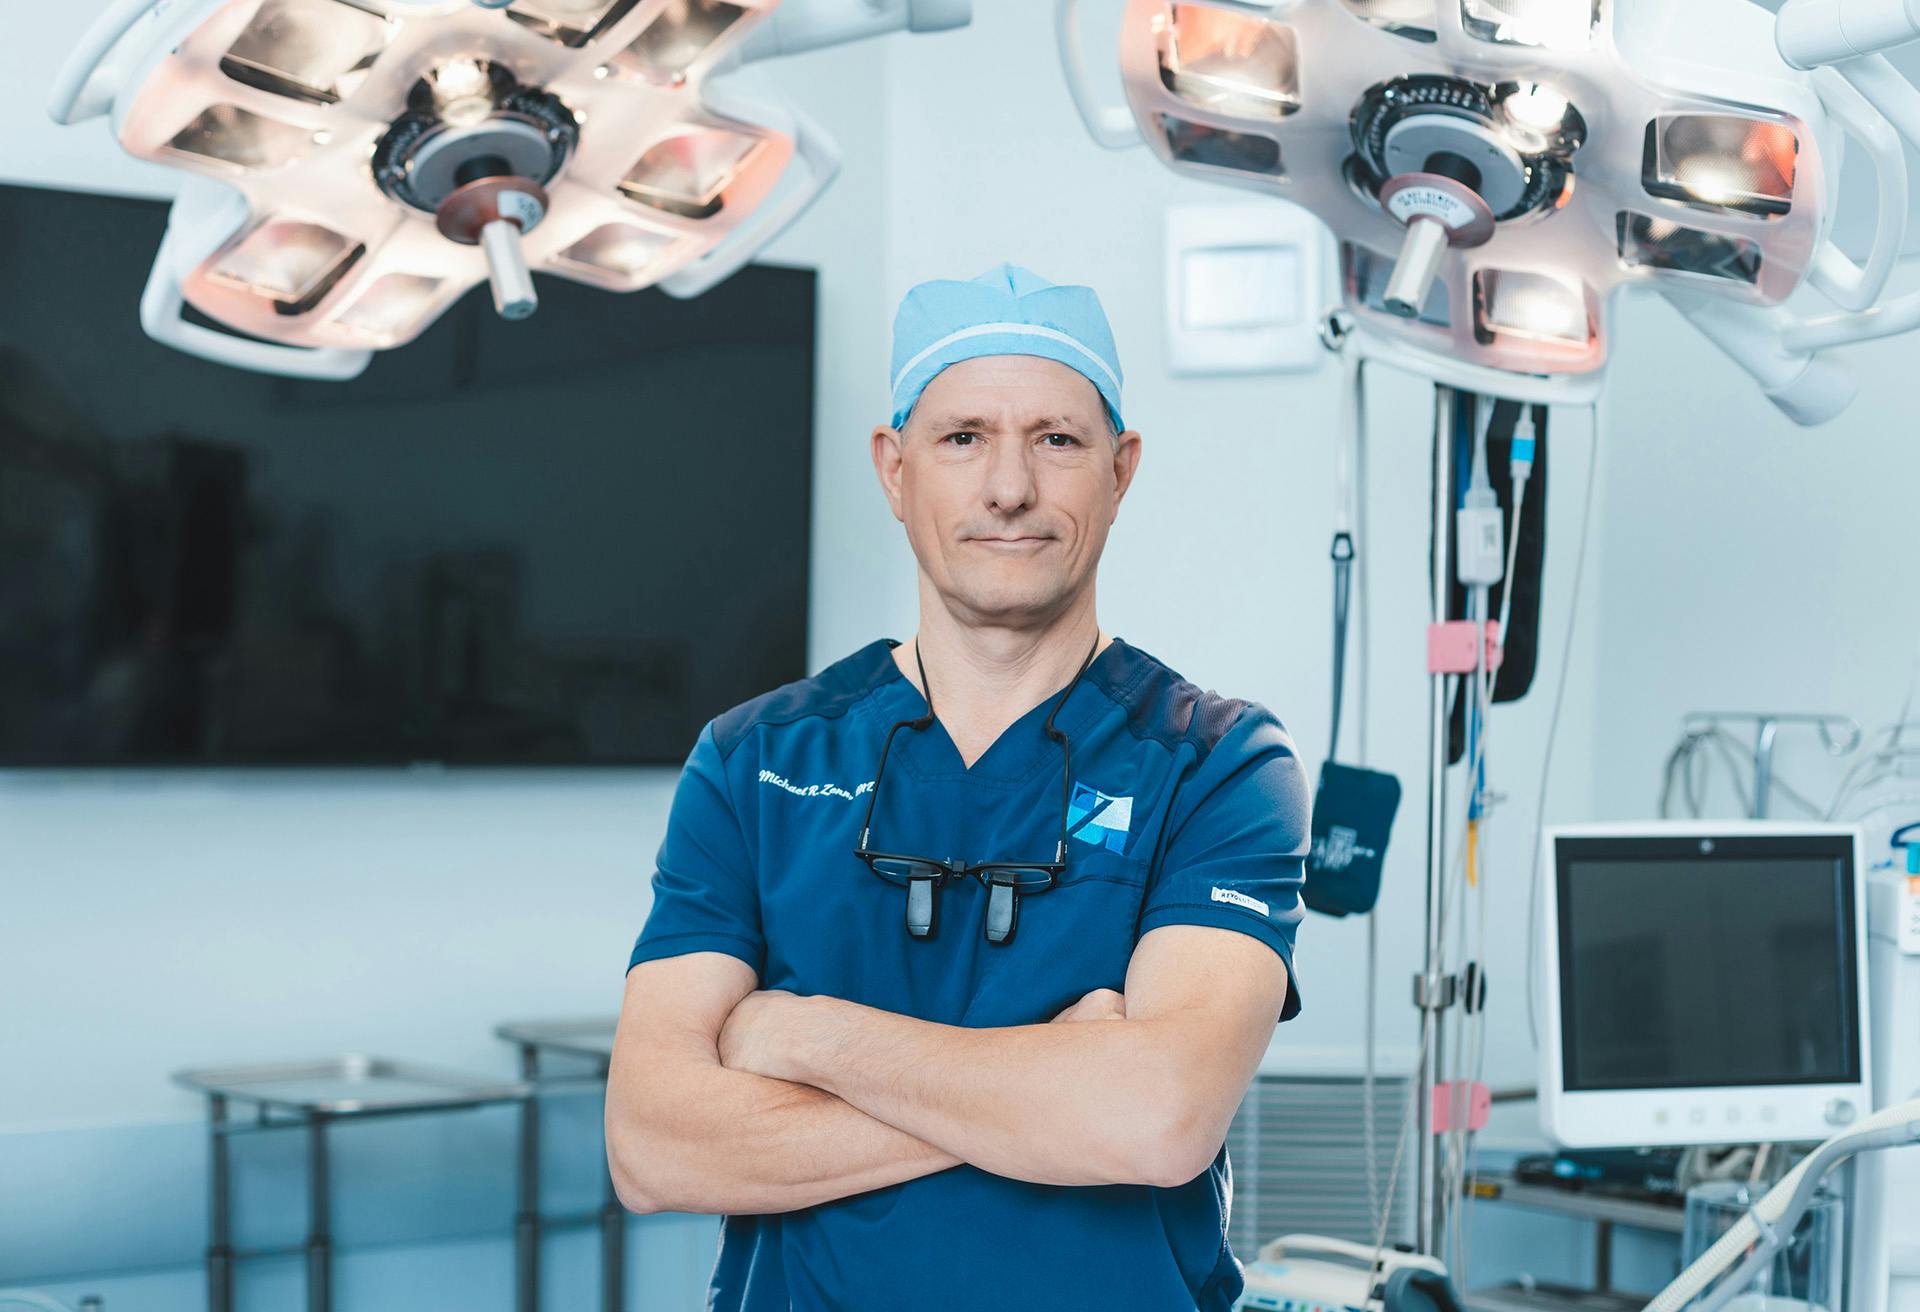 Dr. Zenn standing in an operating room with his arms crossed